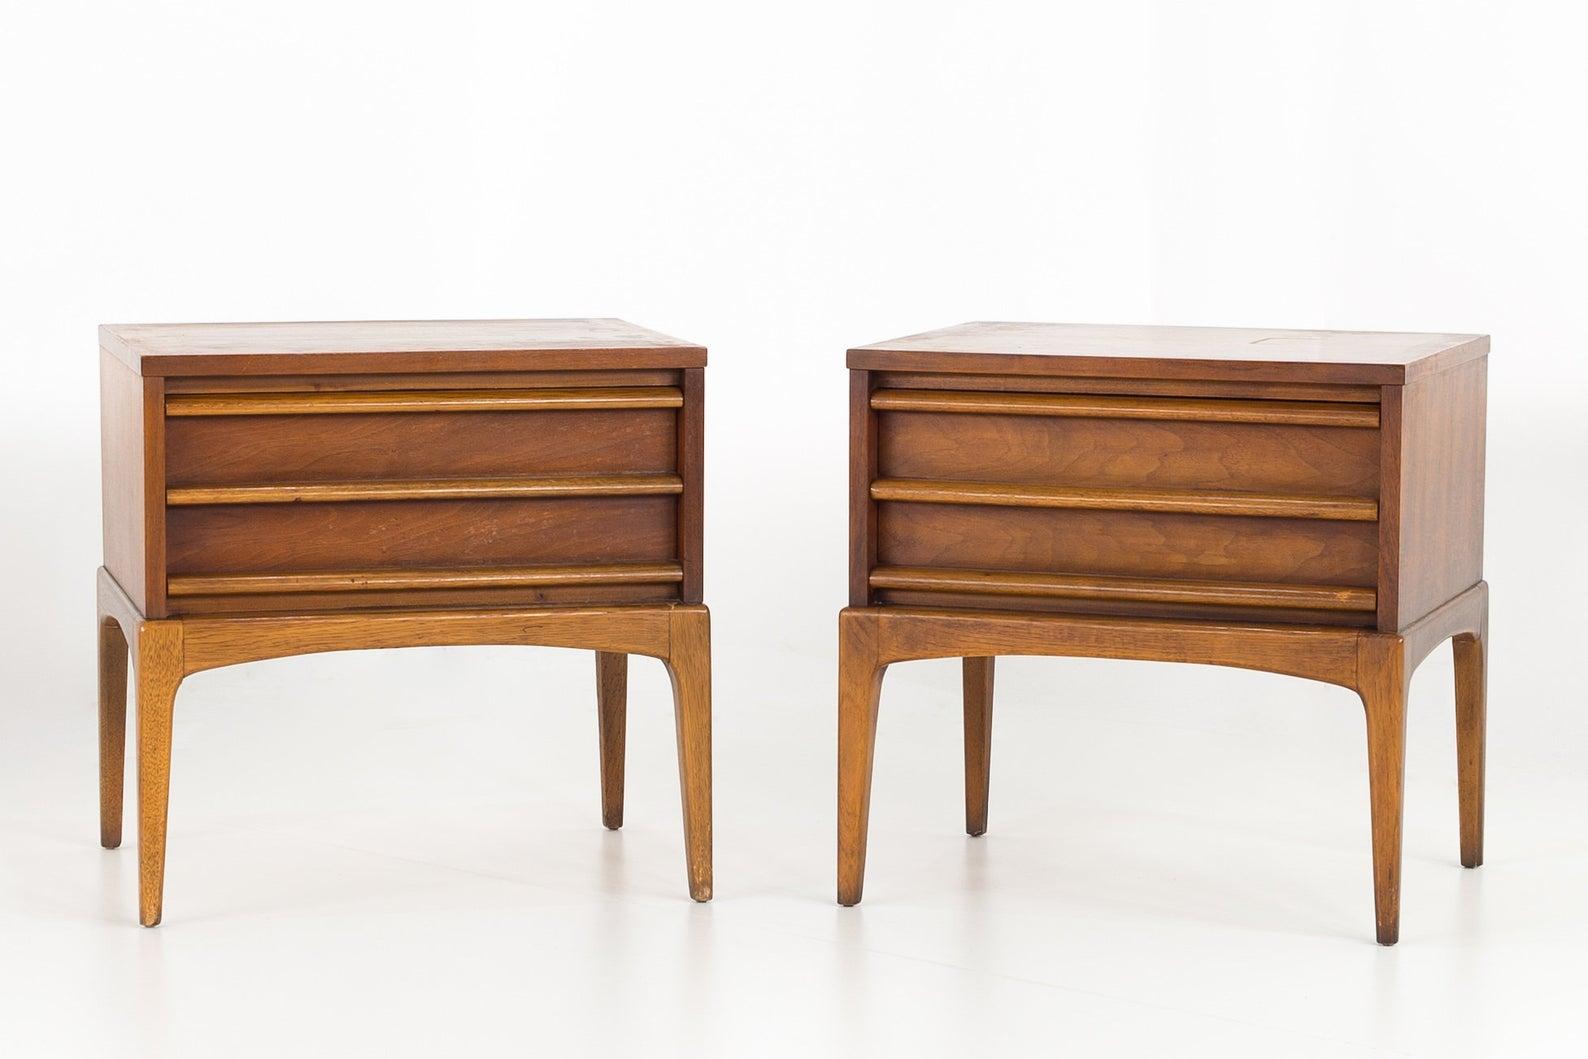 Paul McCobb style Lane Rhythm mid-century 2 drawer nightstands - pair
Each nightstand measures 22.5 wide x 17.5 deep x 22.25 inches high

This price includes getting this piece in what we call restored vintage condition. That means the piece is